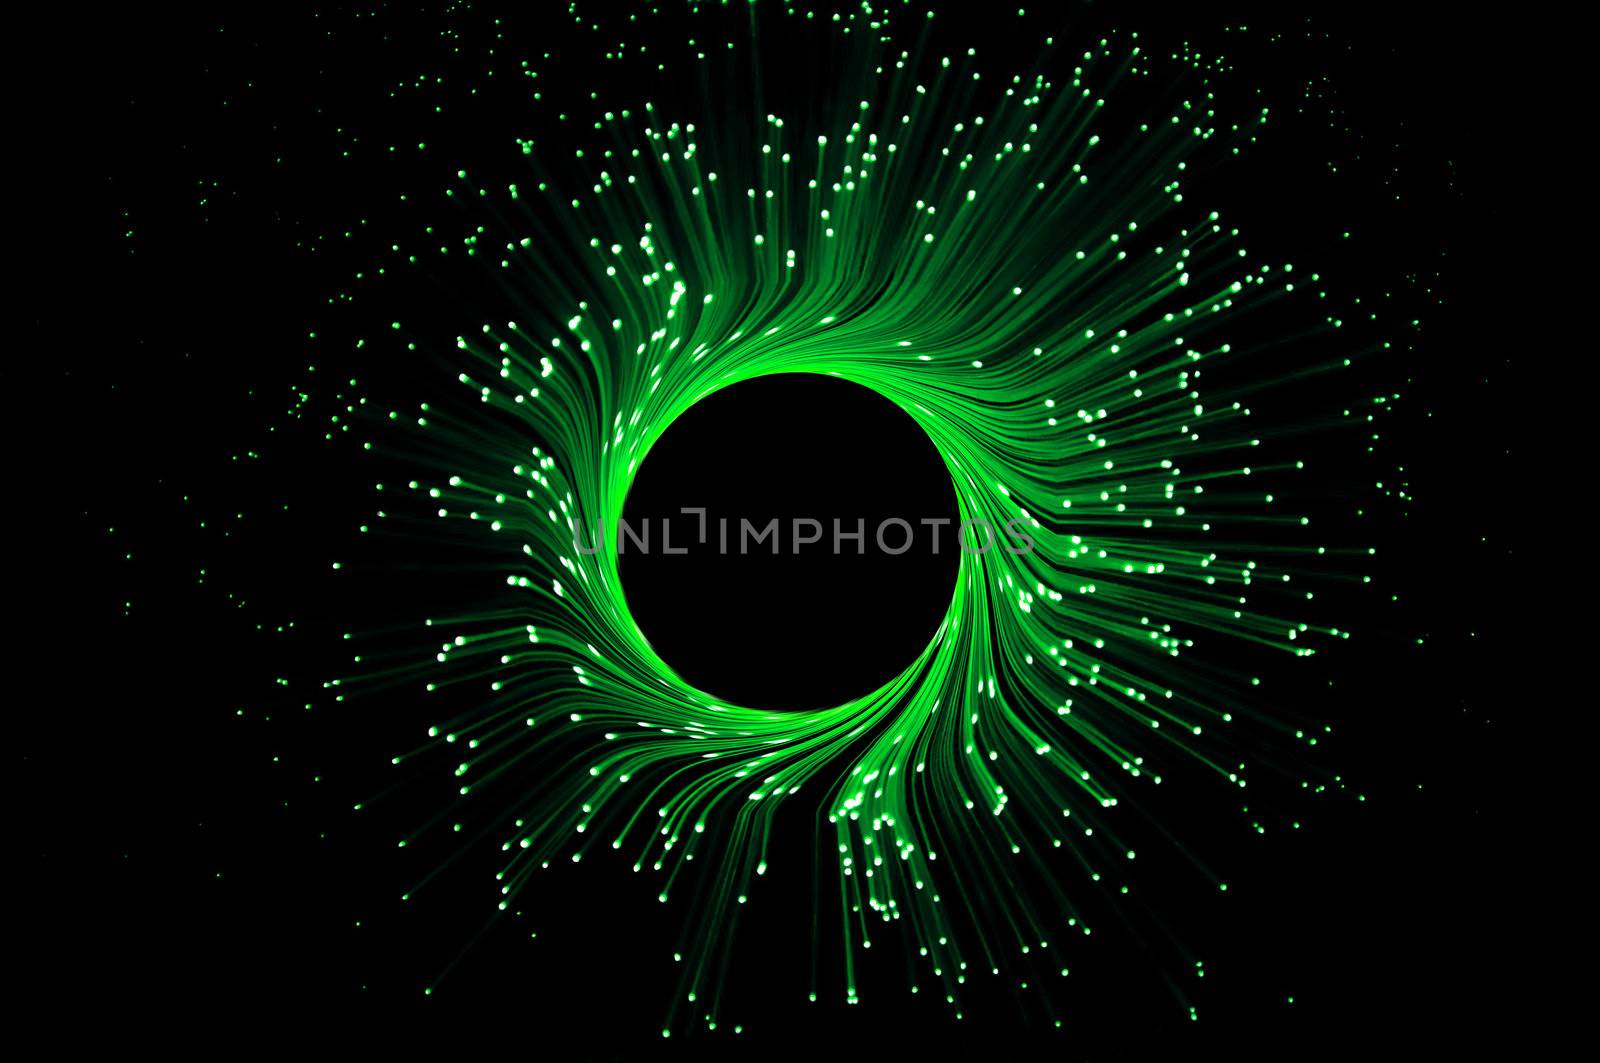 Many illuminated fibre optic light strands forming a ring against black background